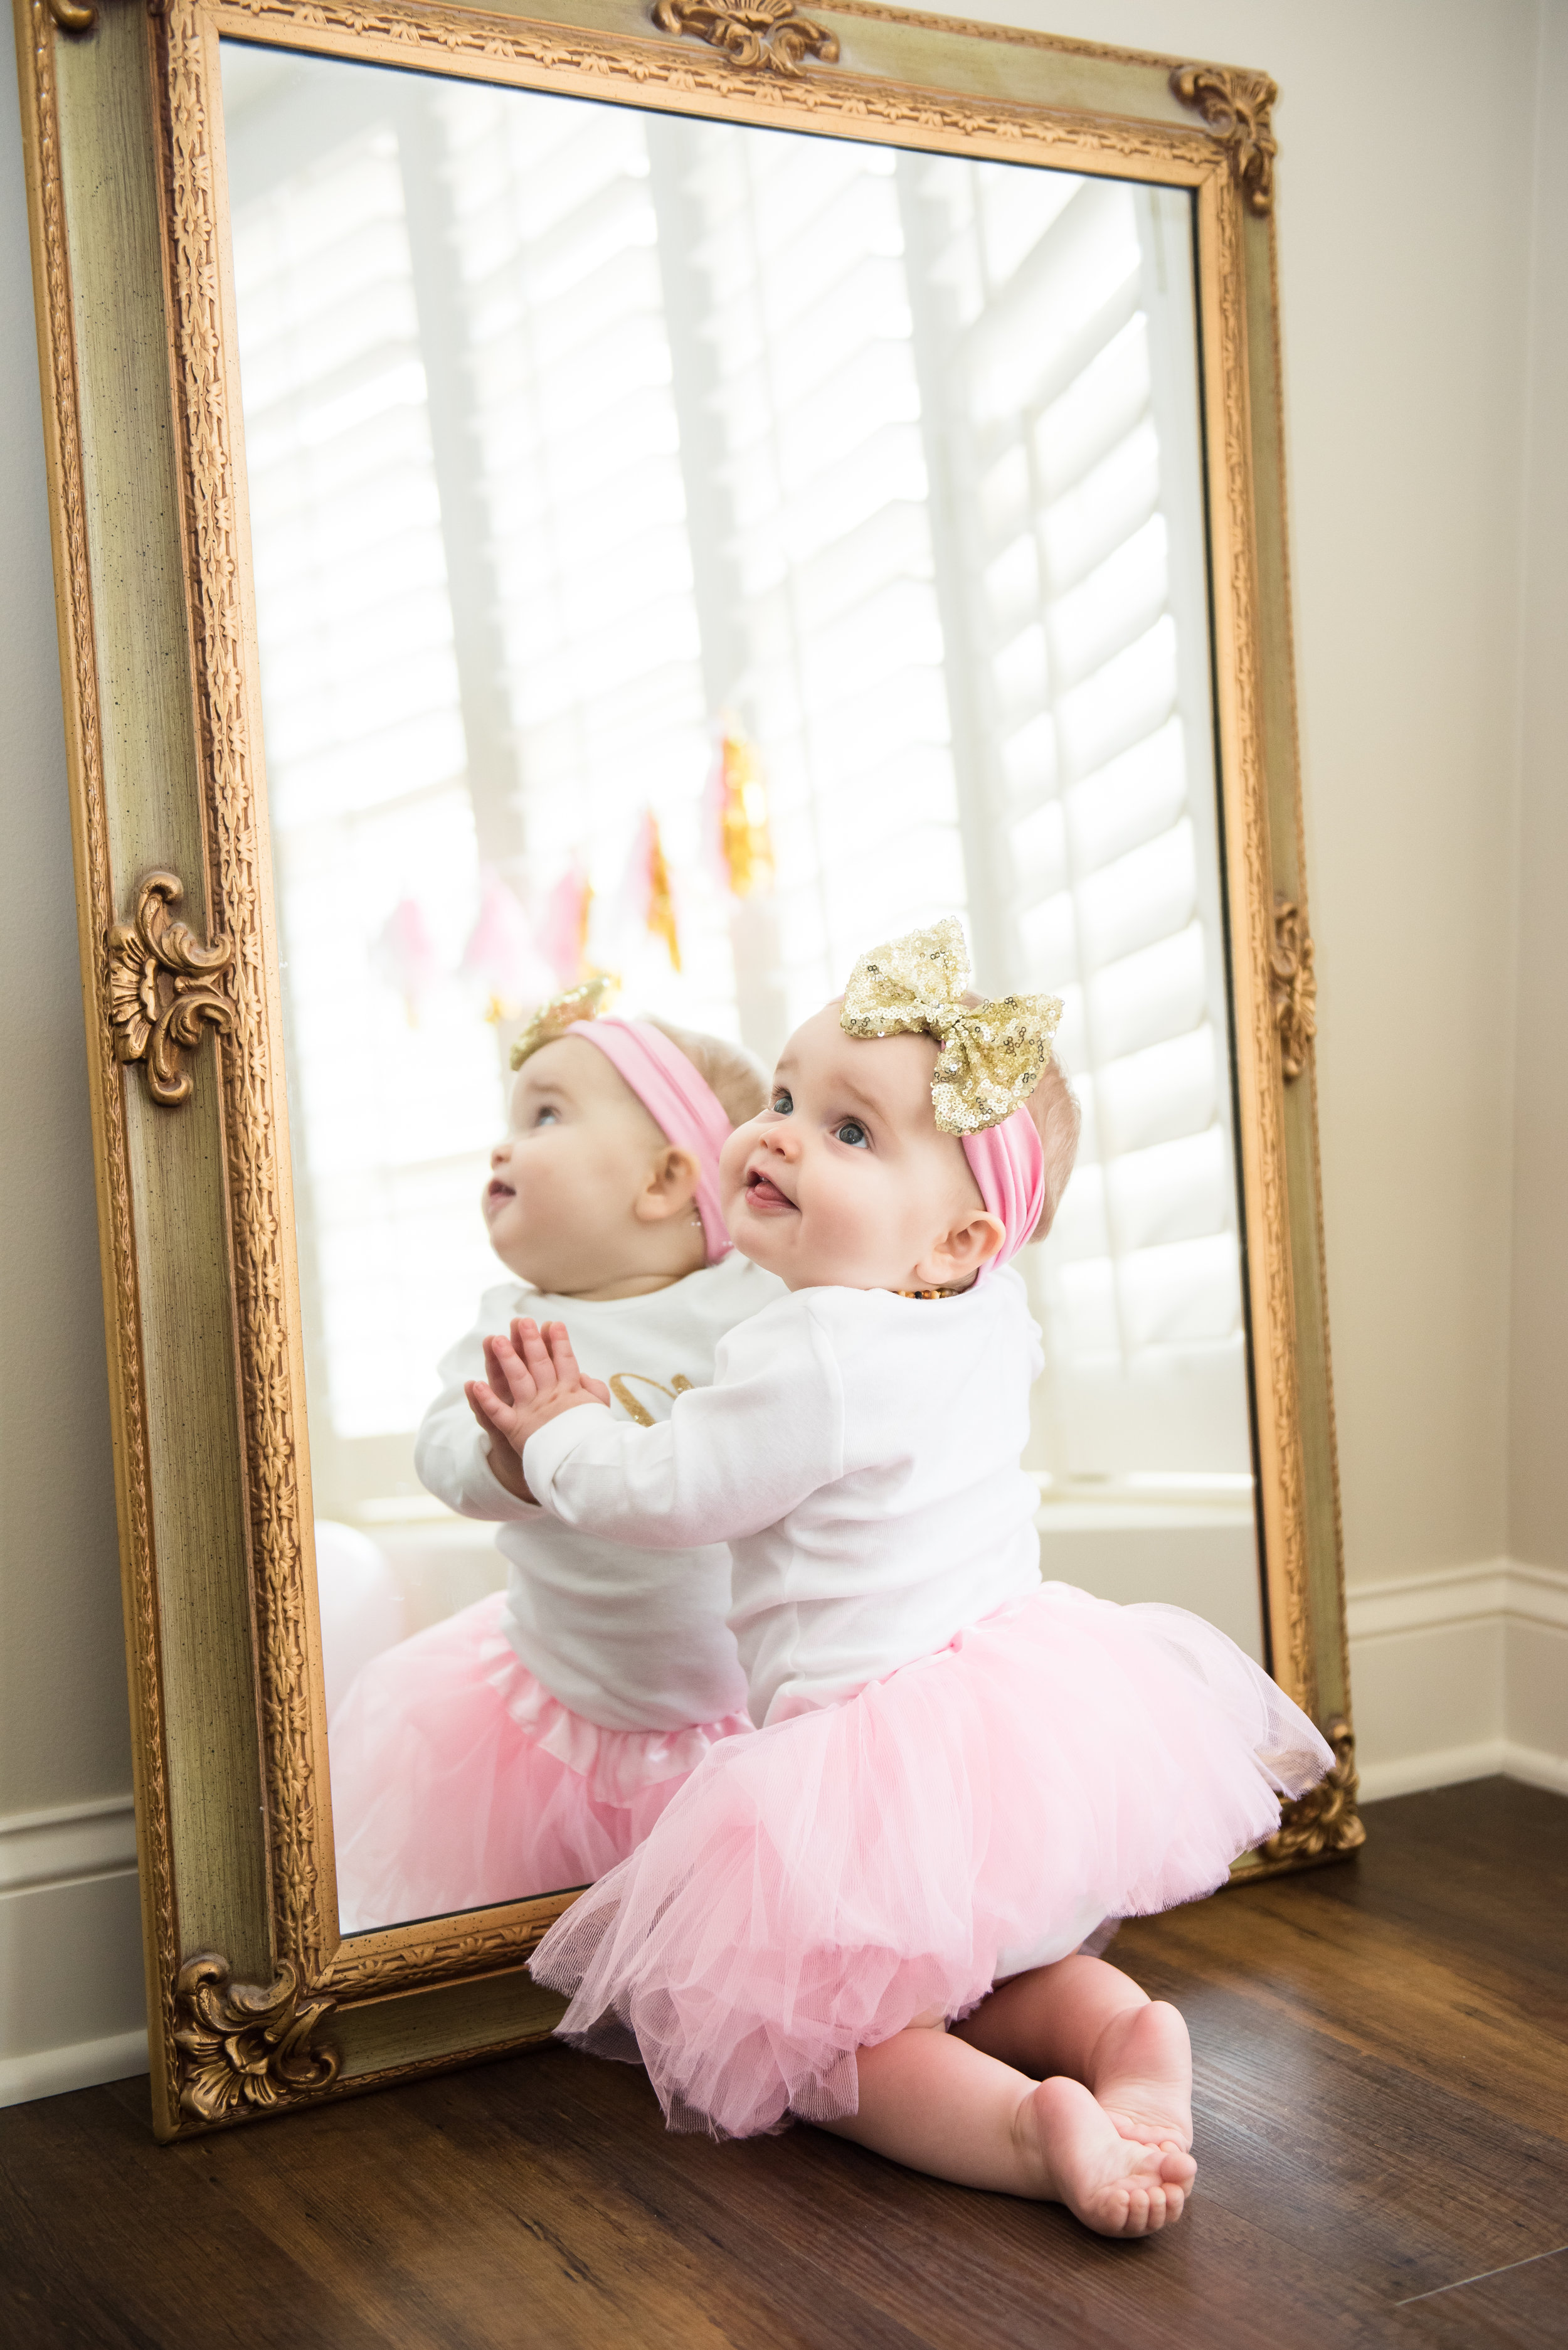 Baby and Mirror | Kimberly Cauble Photography